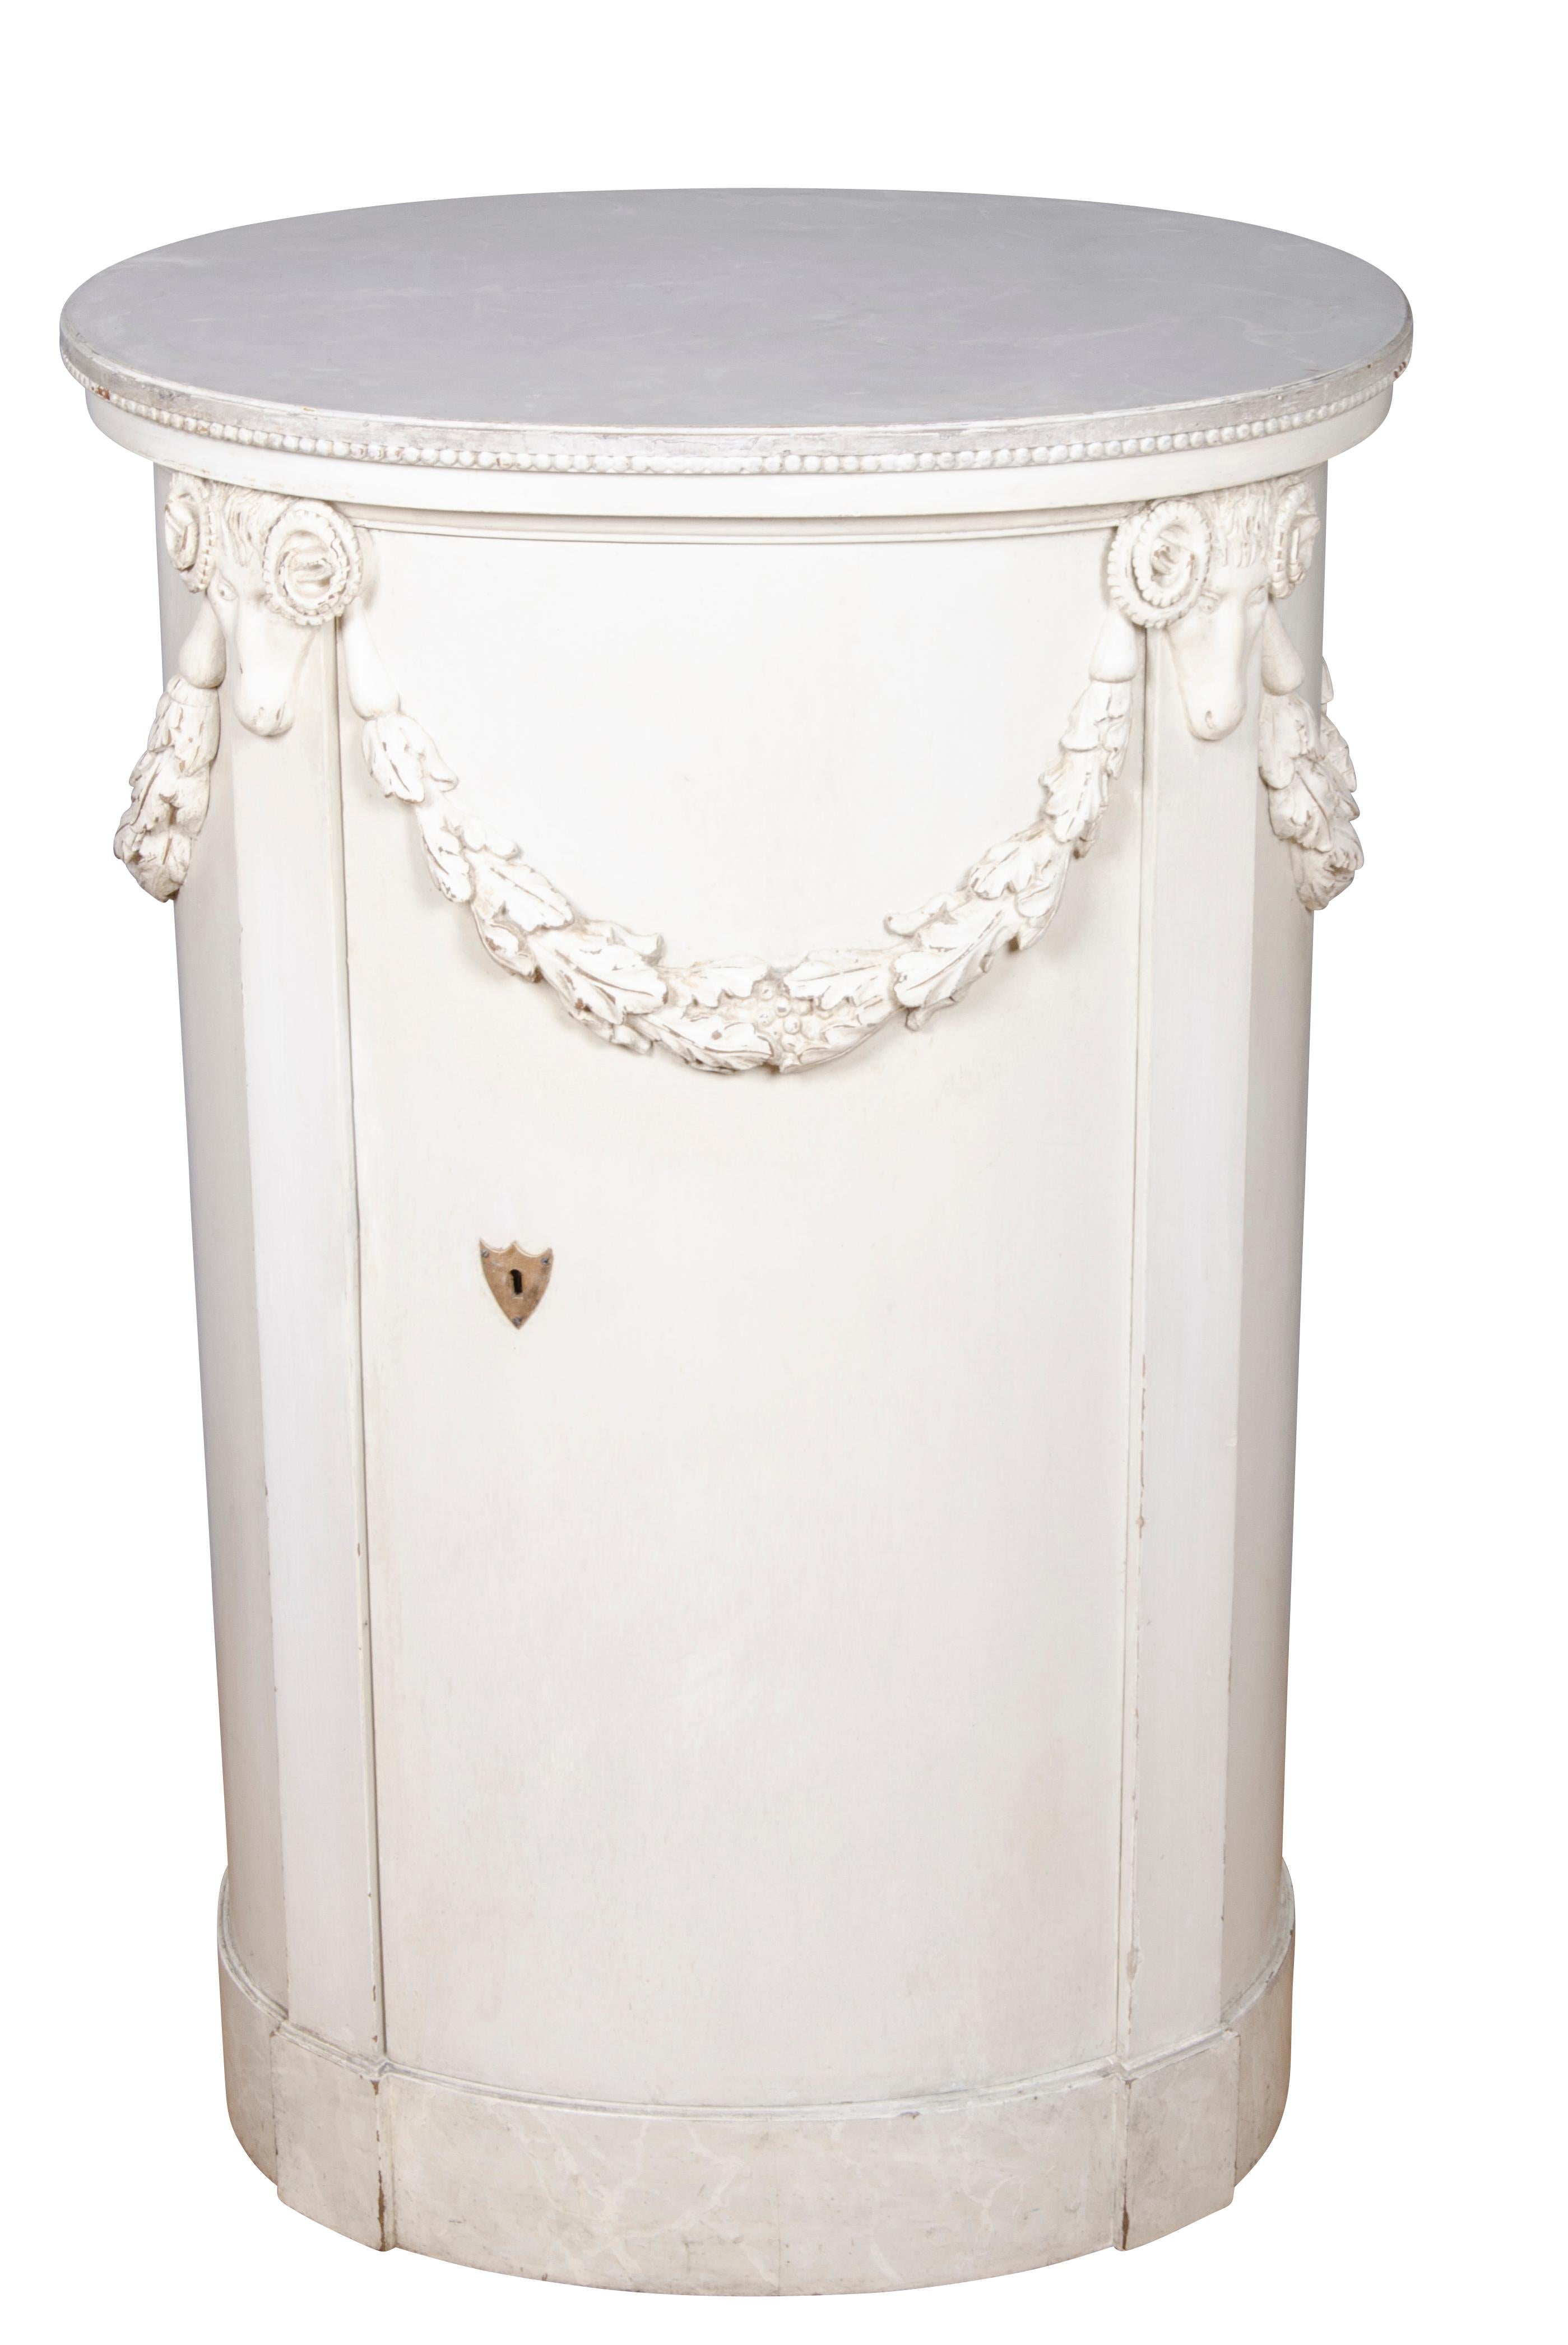 Neoclassical Revival Pair of Neoclassic Style Painted Pedestals